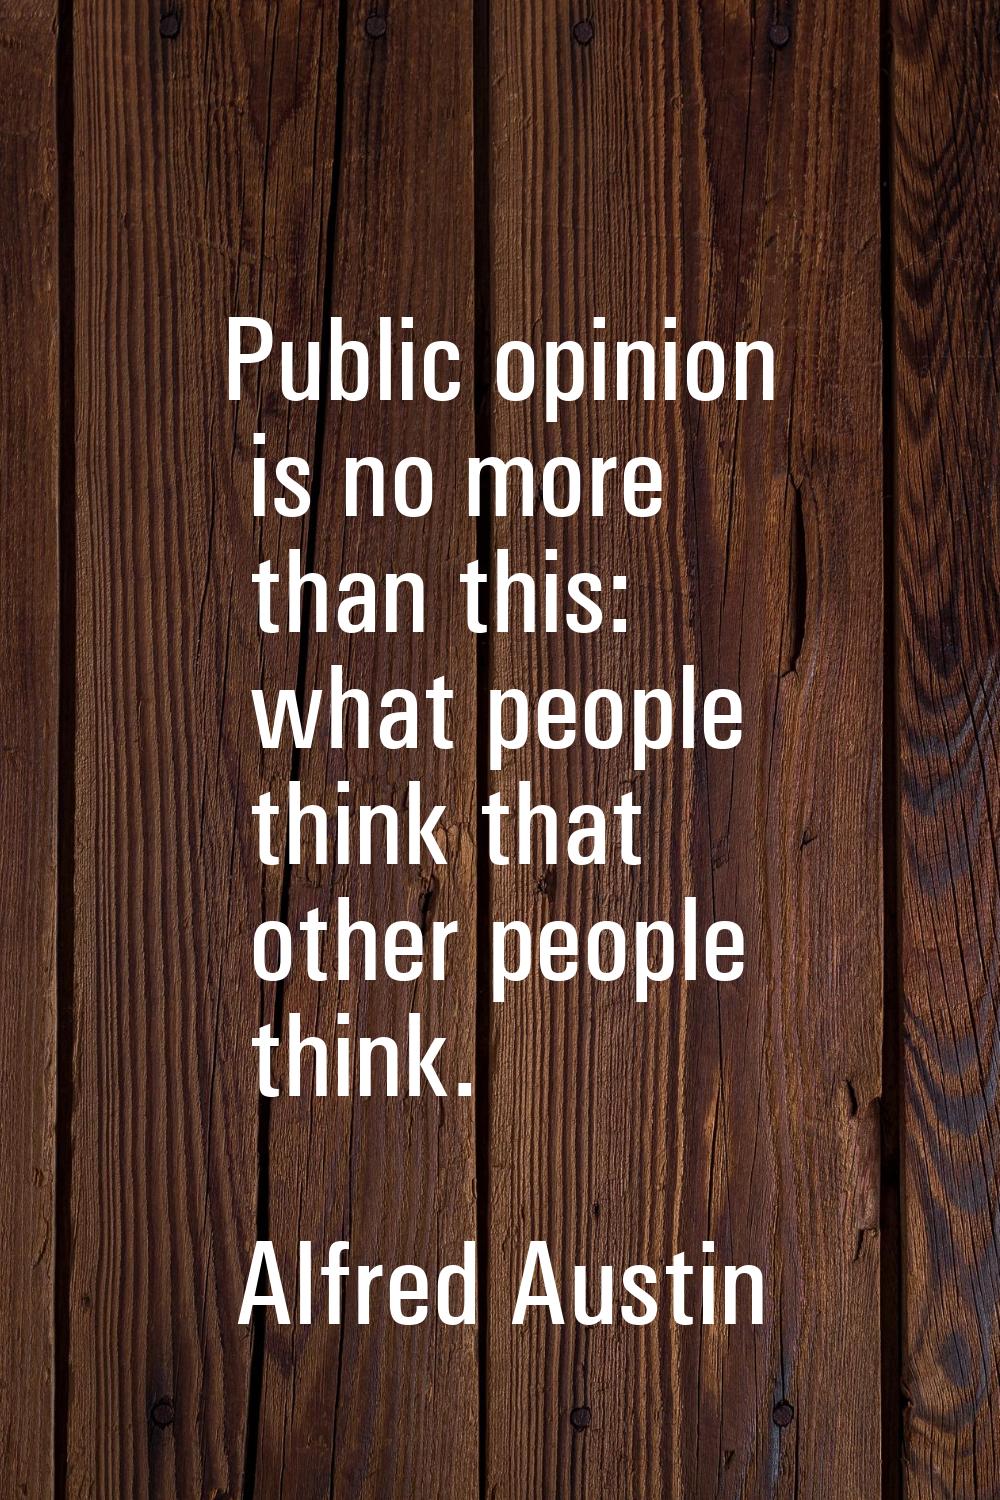 Public opinion is no more than this: what people think that other people think.